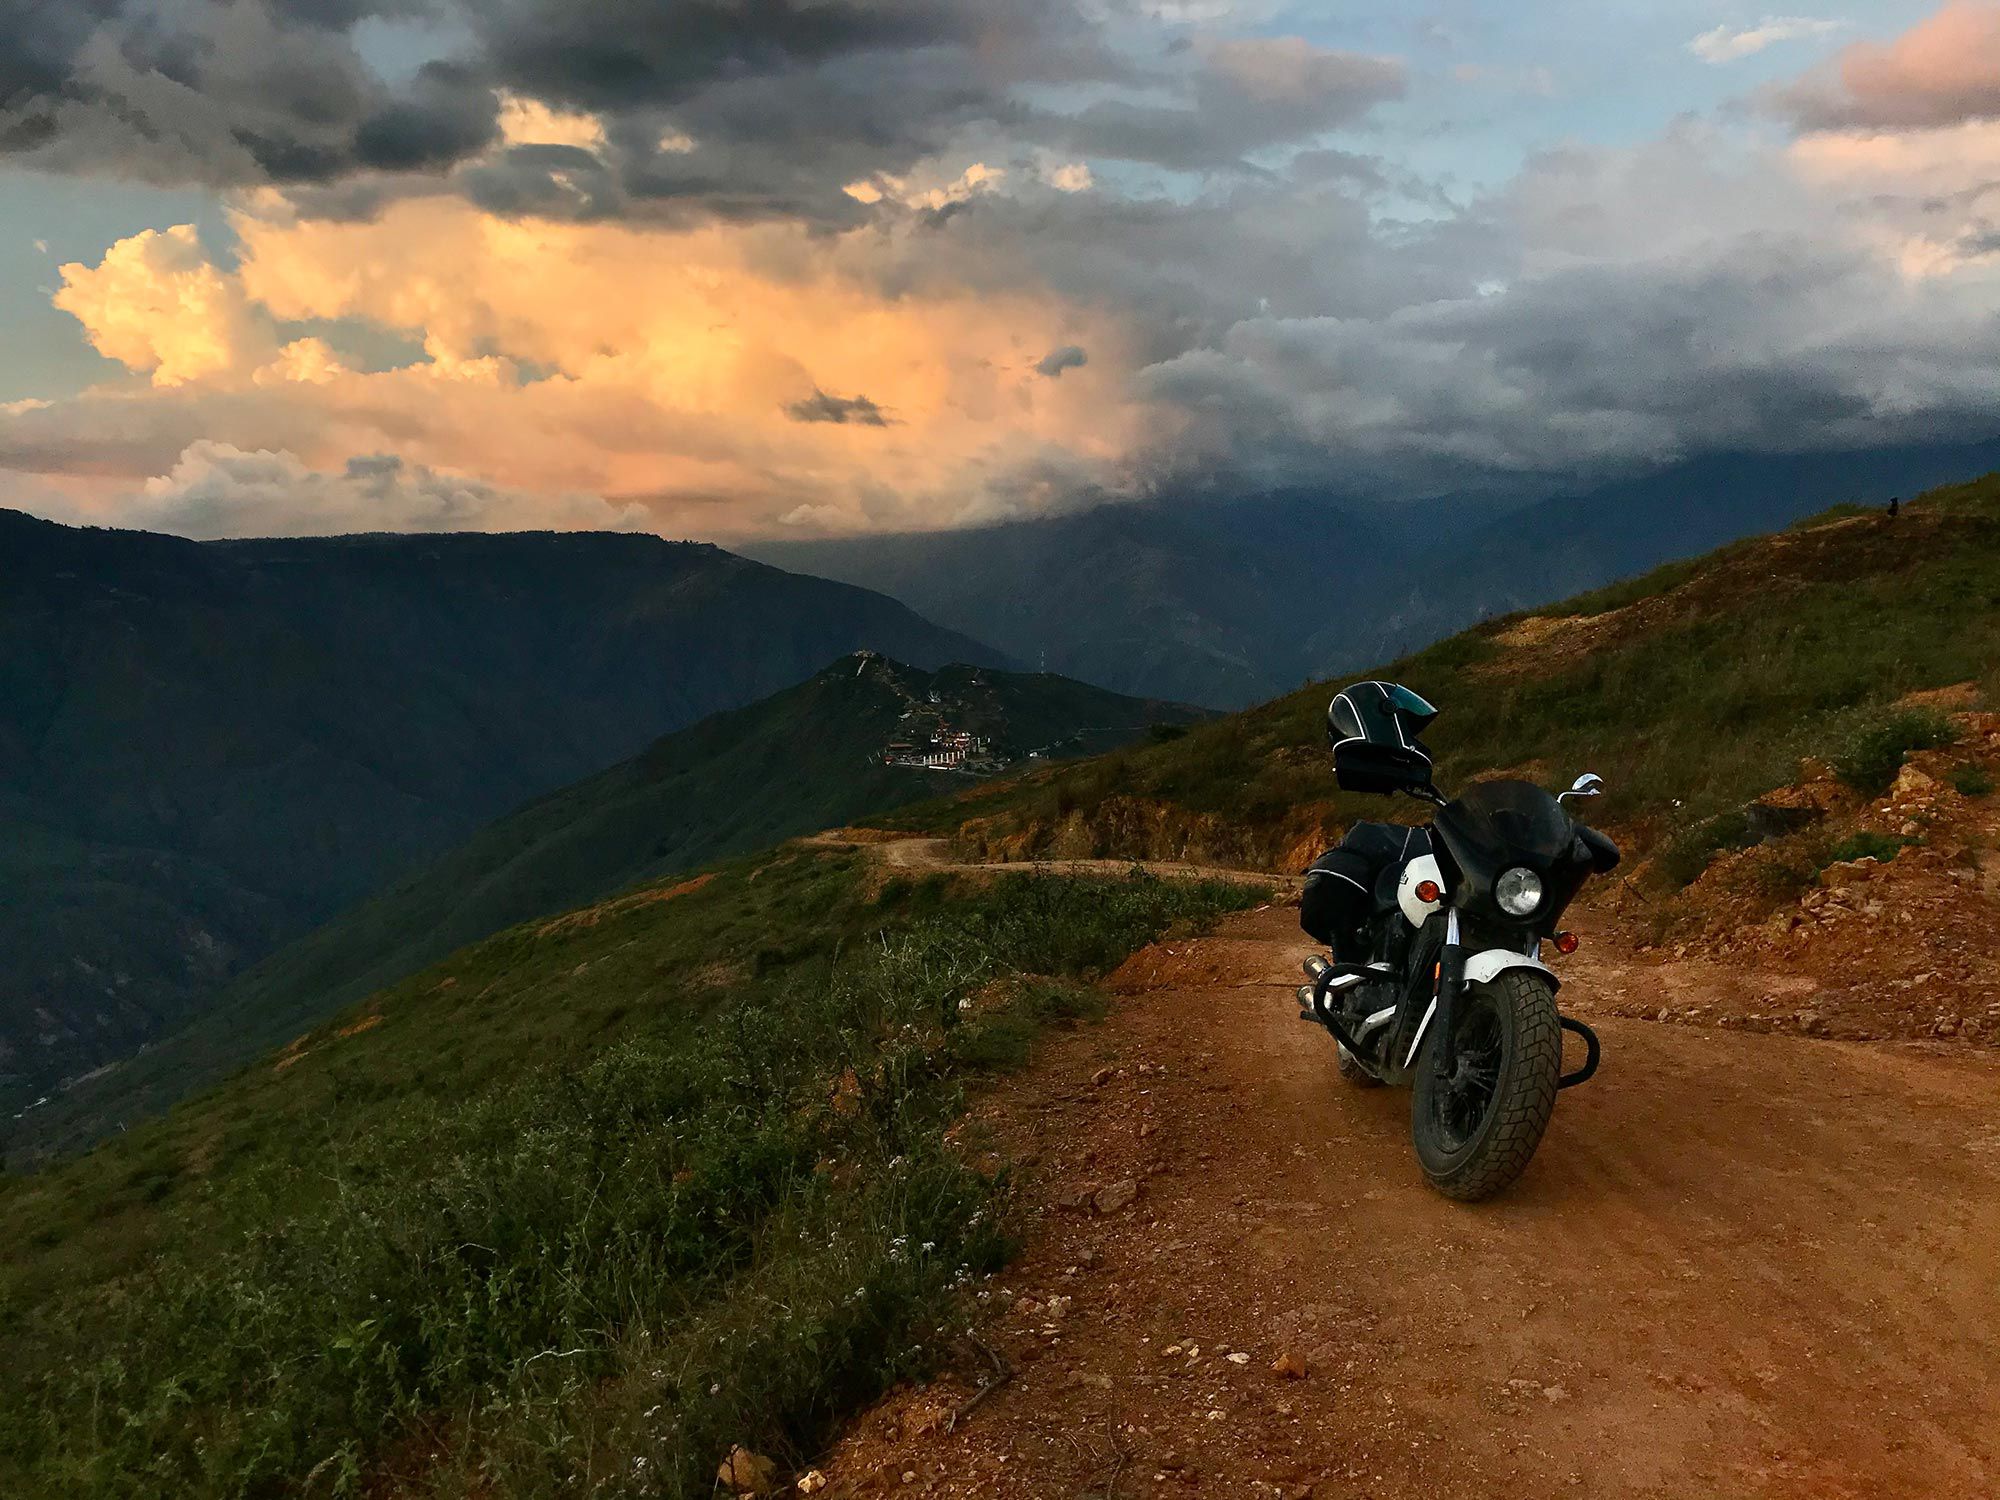 You don’t have to stray far from the main route to find wonderful dirt roads to explore, such as this one near the ridgeline and Chicamocha National Park entrance.